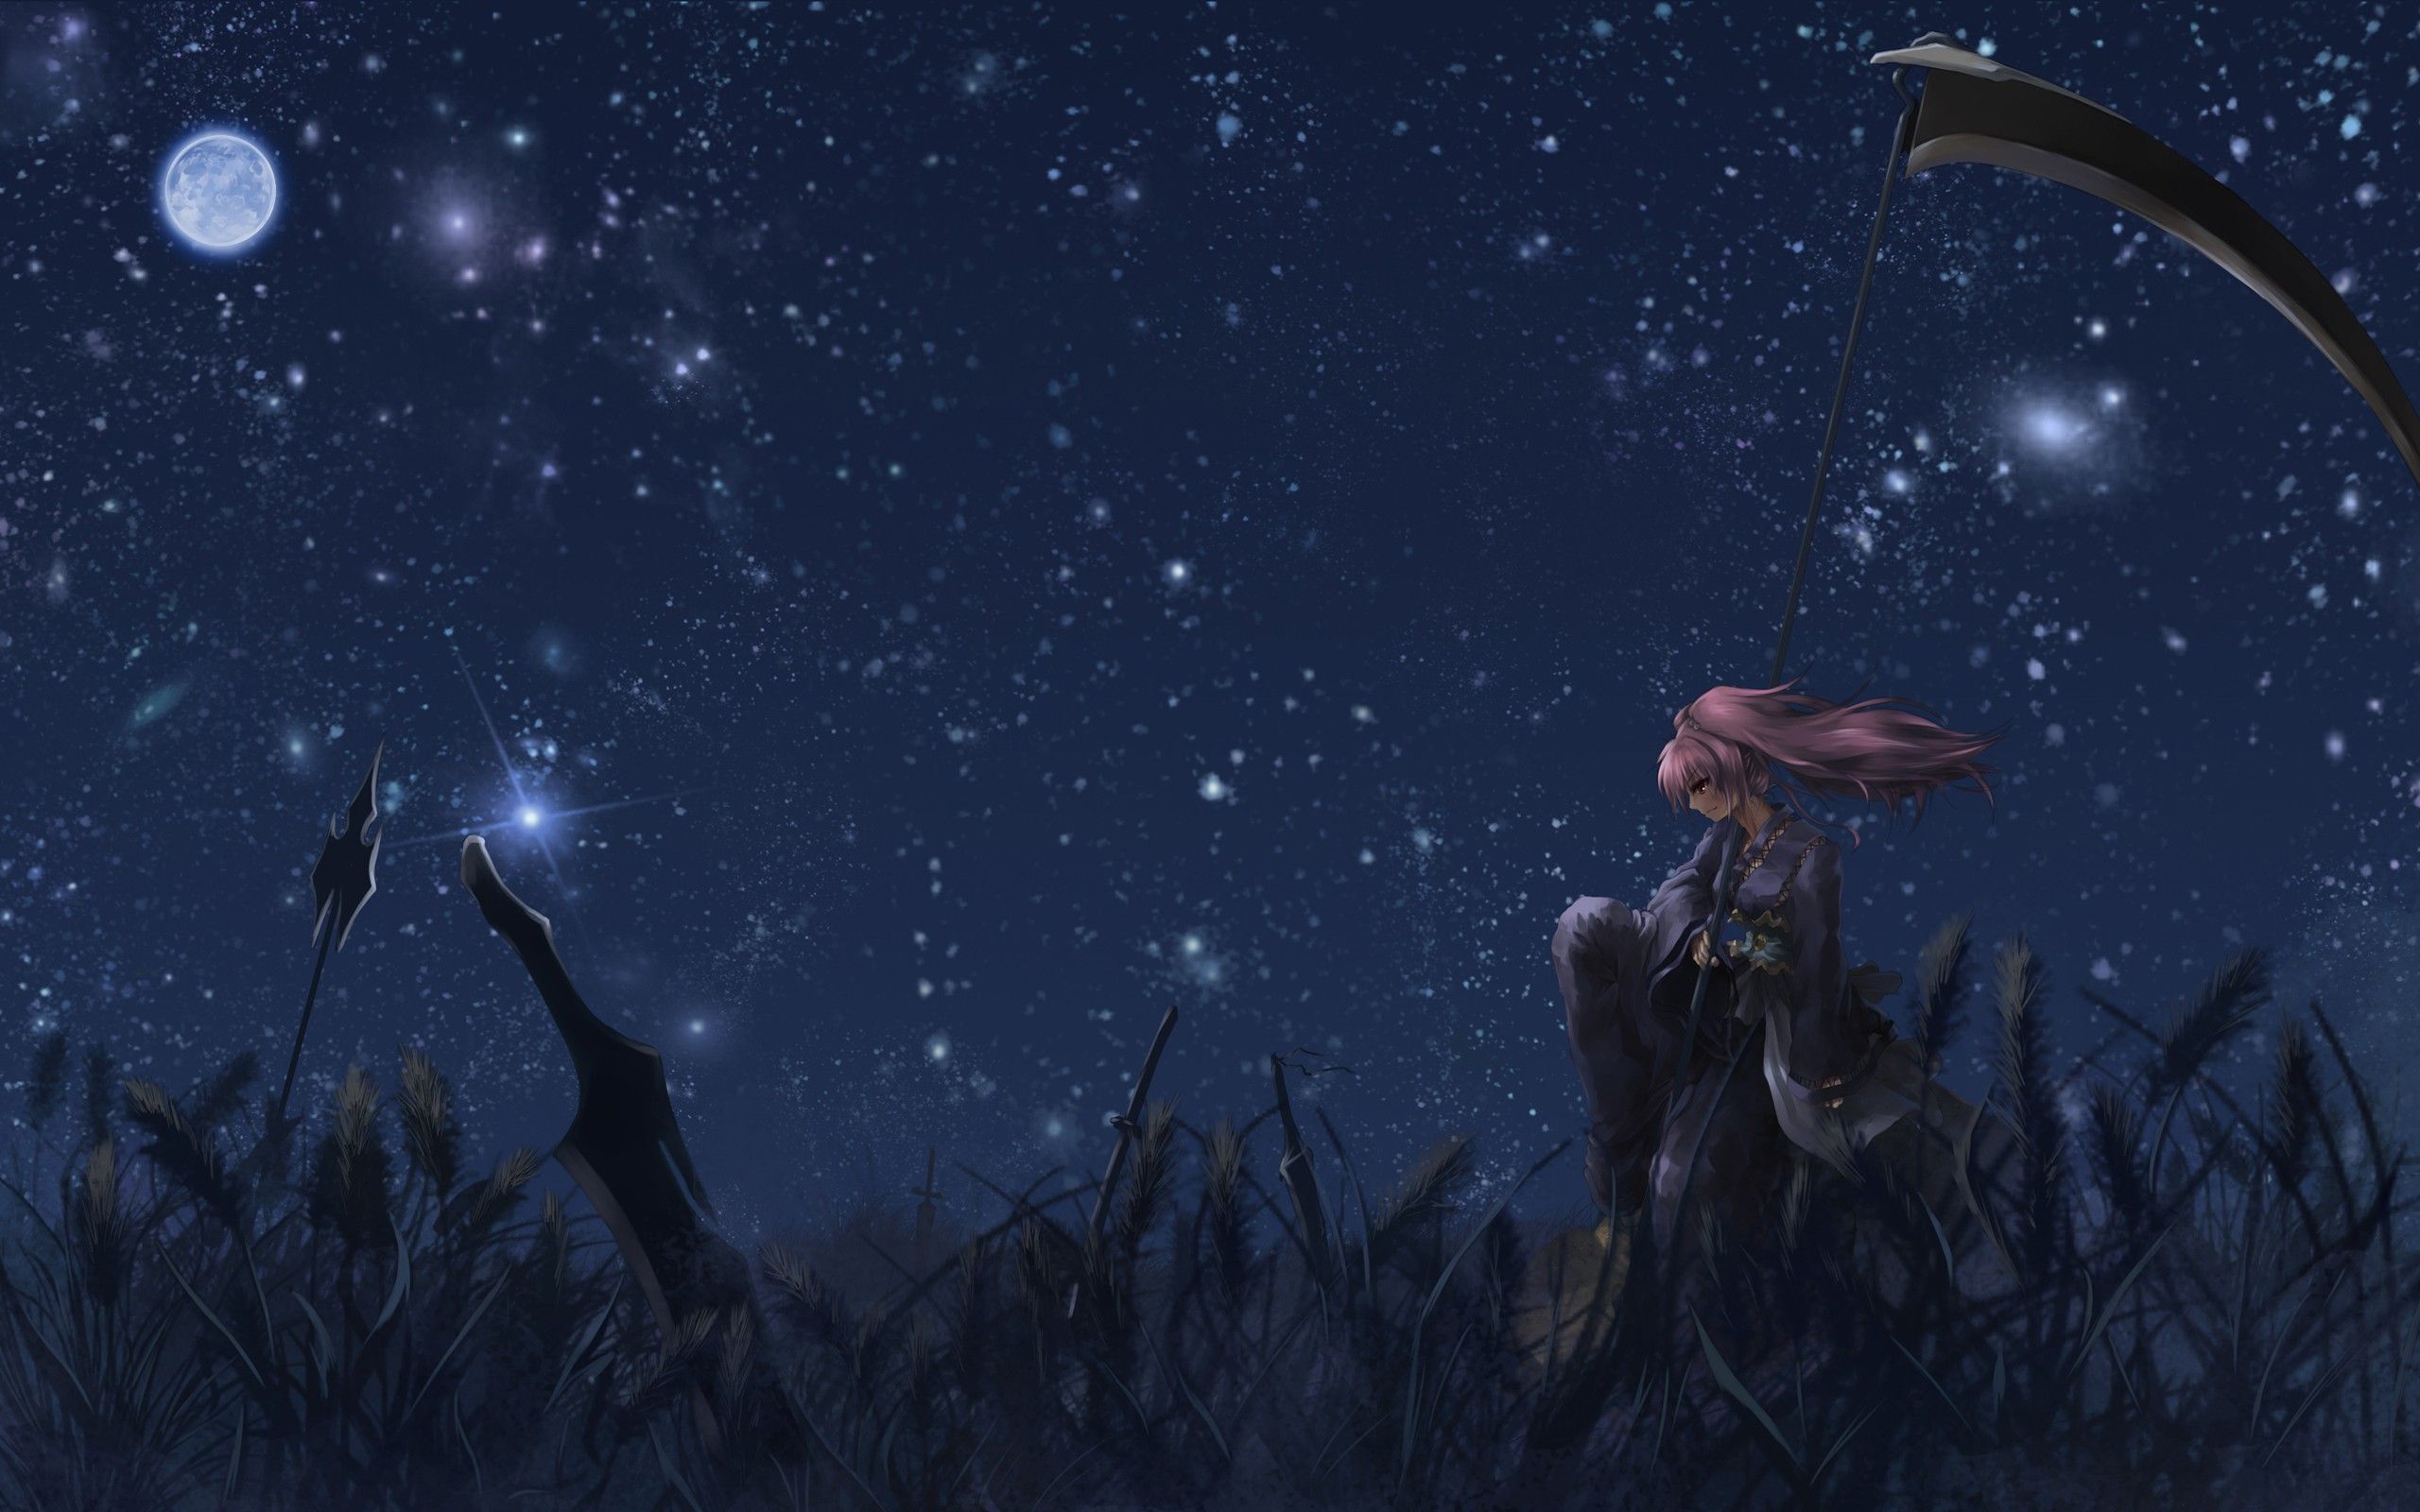 Anime Girl And Cool Starry Sky Wallpapers